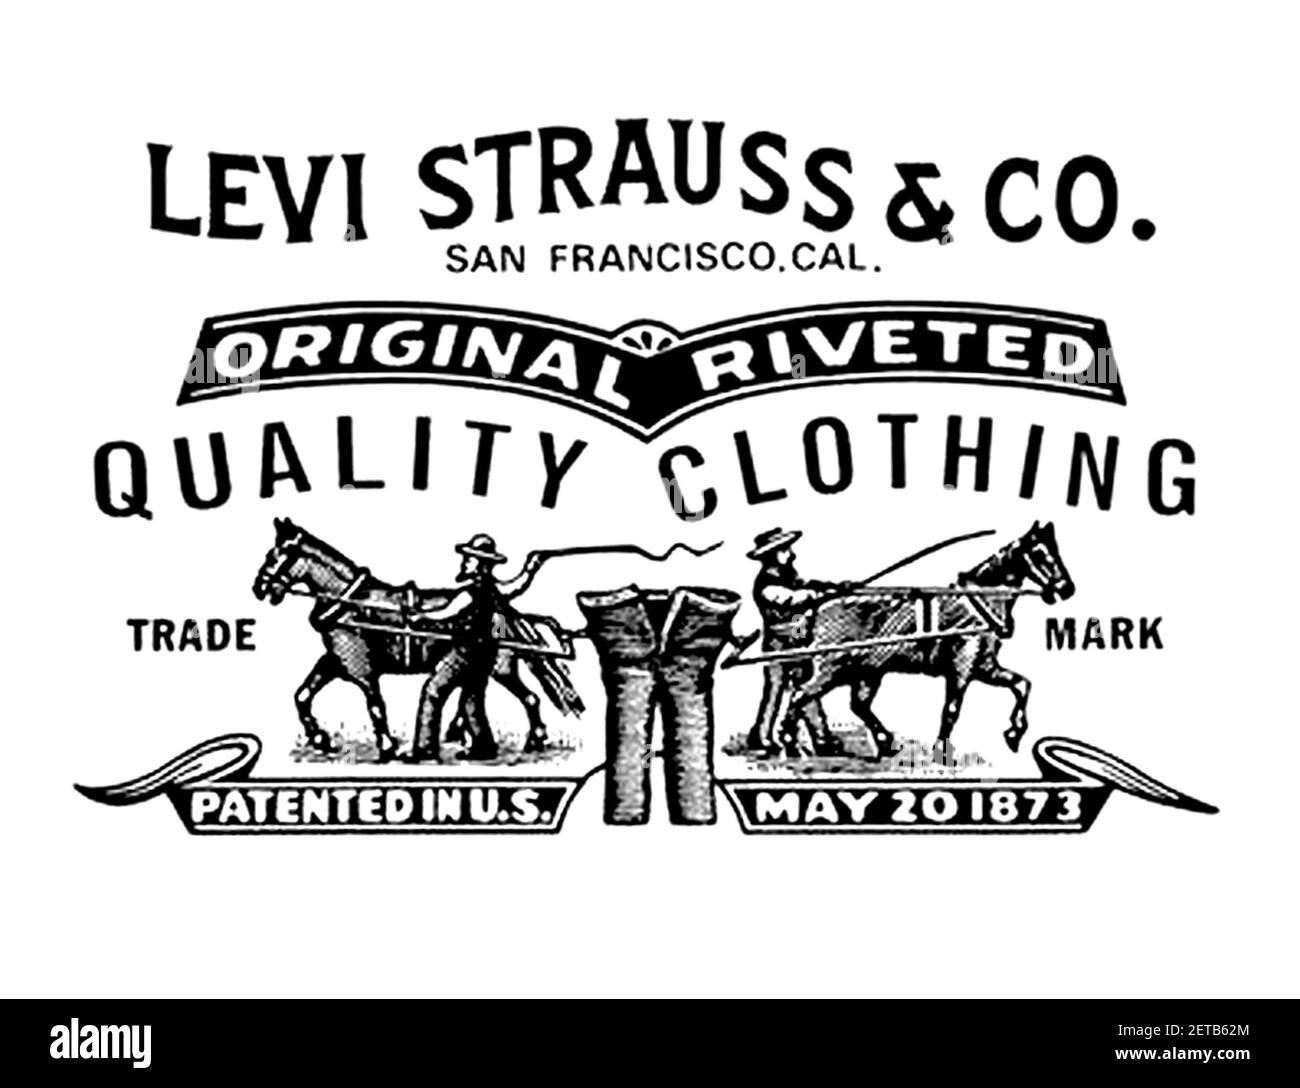 Levi strauss Black and White Stock Photos & Images - Alamy